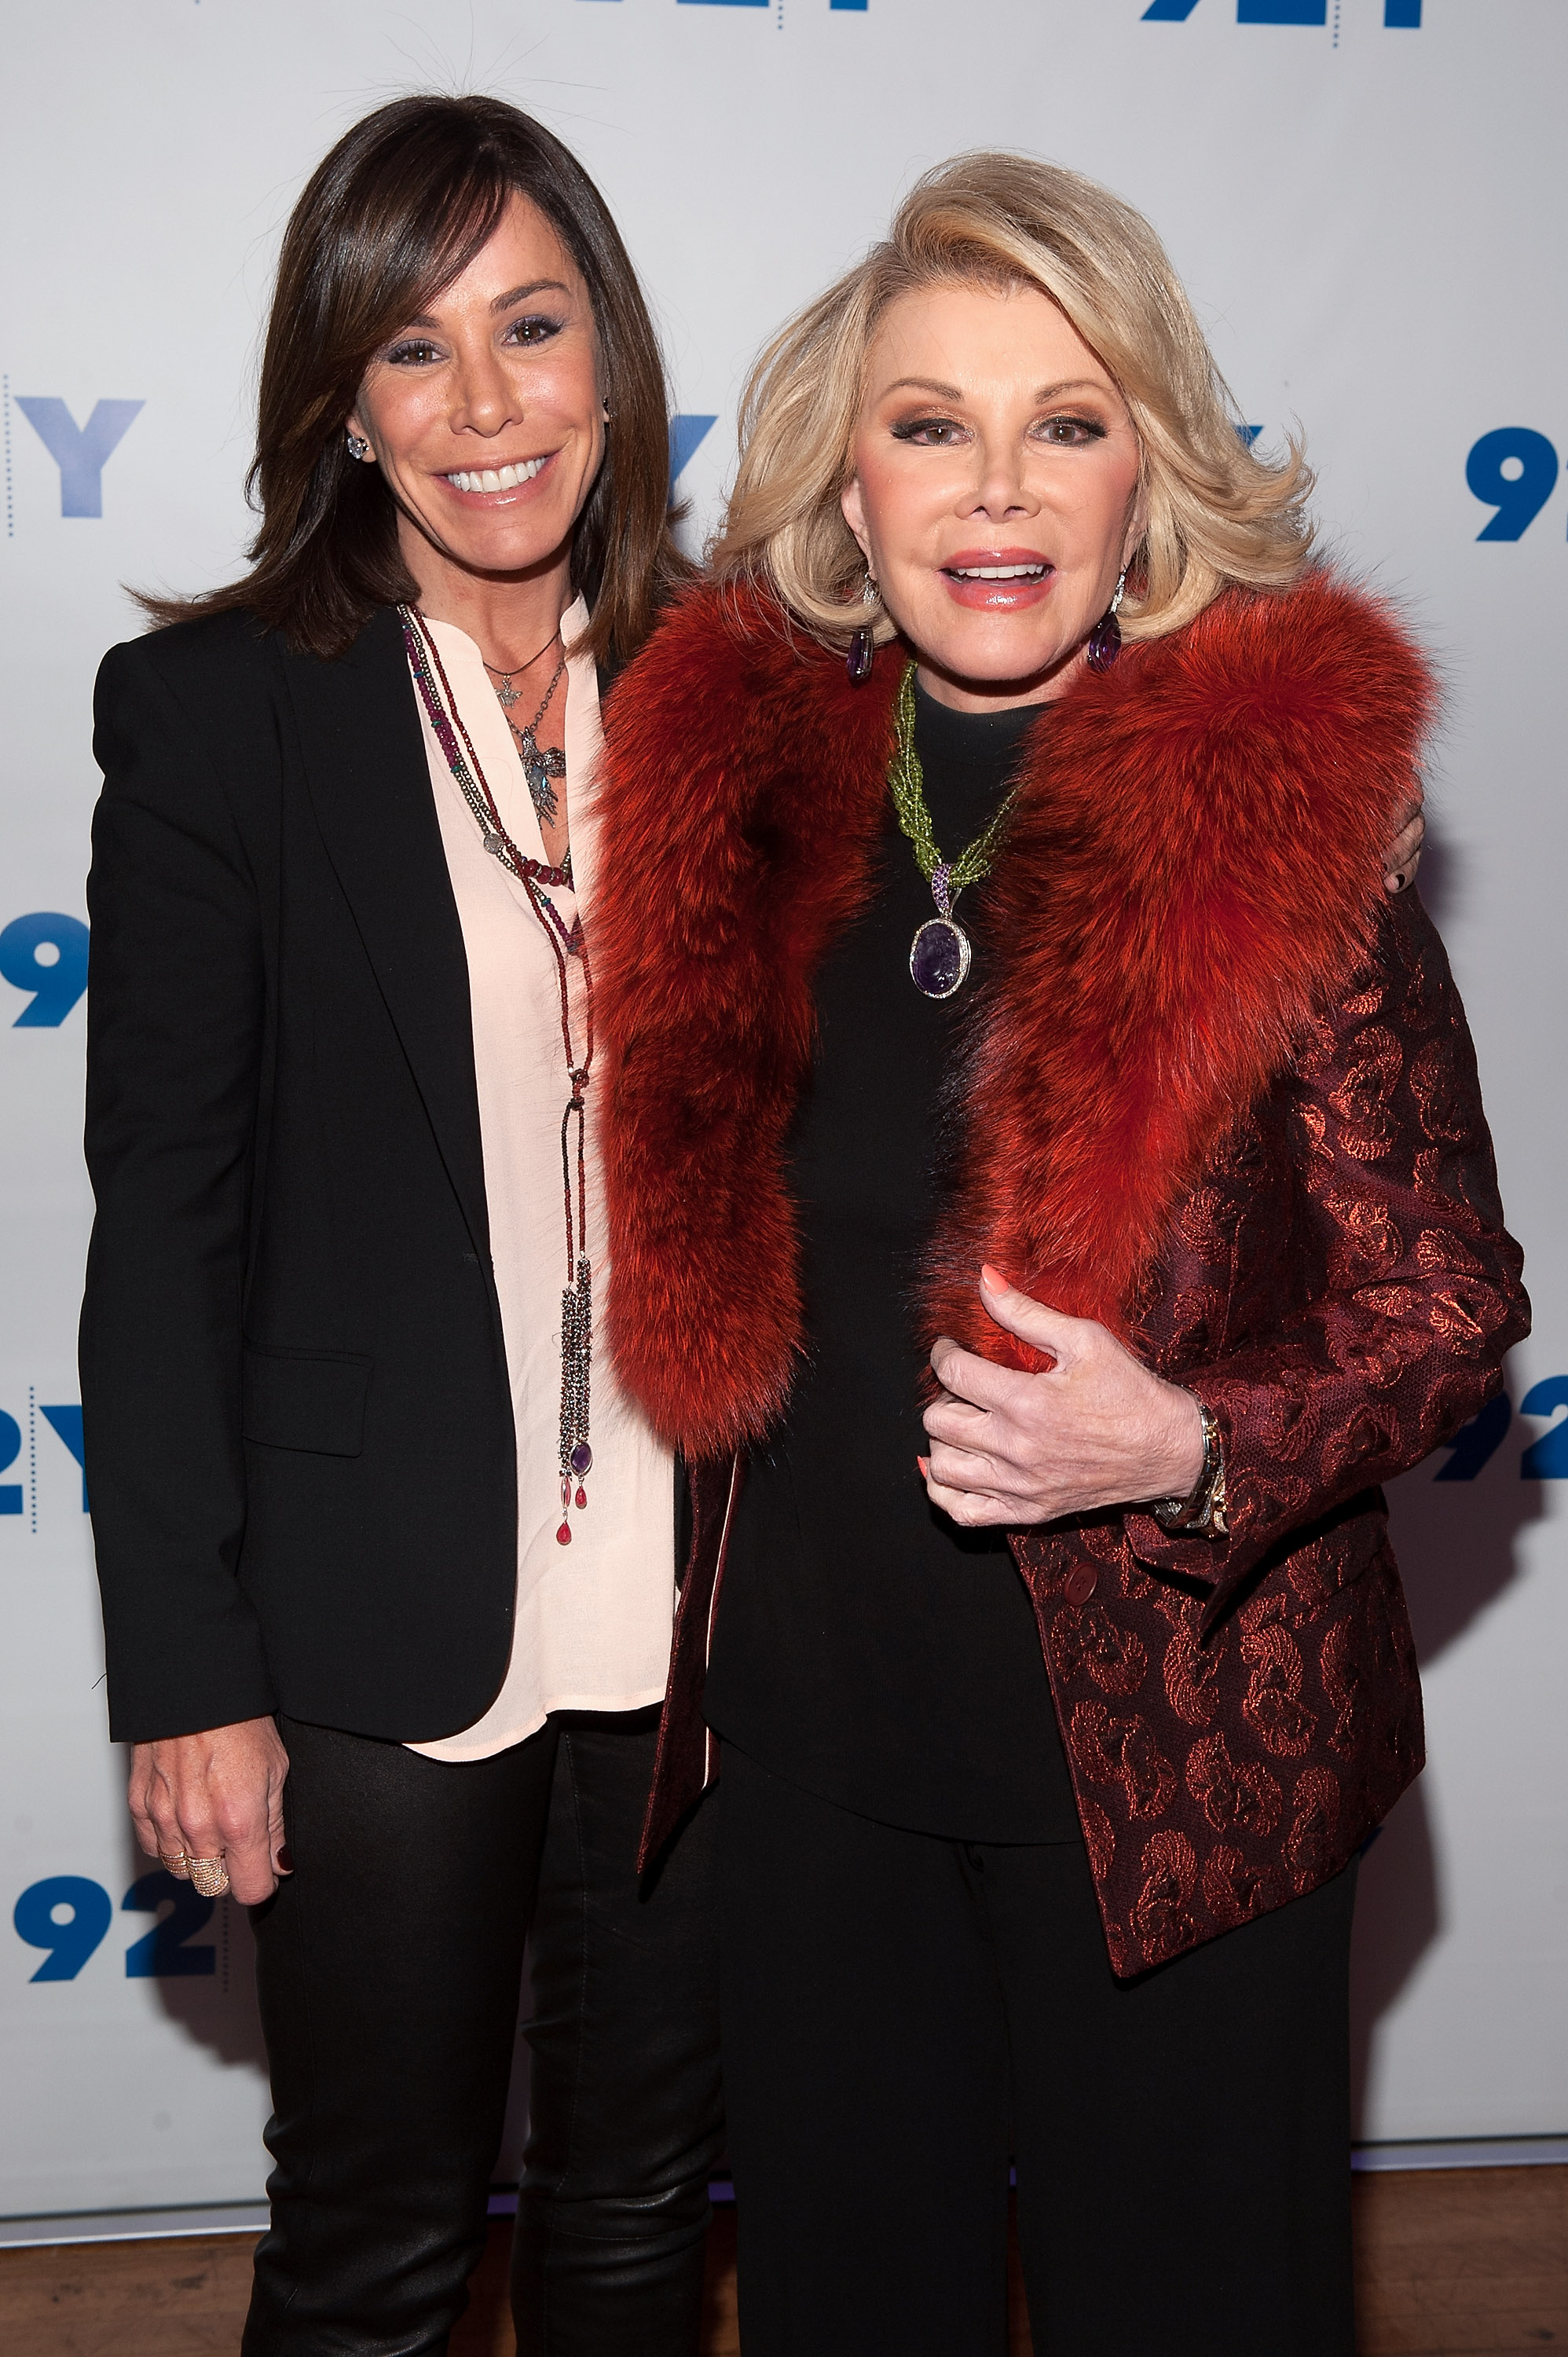 Joan and Melissa Rivers attend An Evening With Joan And Melissa Rivers at the 92nd Street Y in New York City, on January 22, 2014. | Source: Getty Images